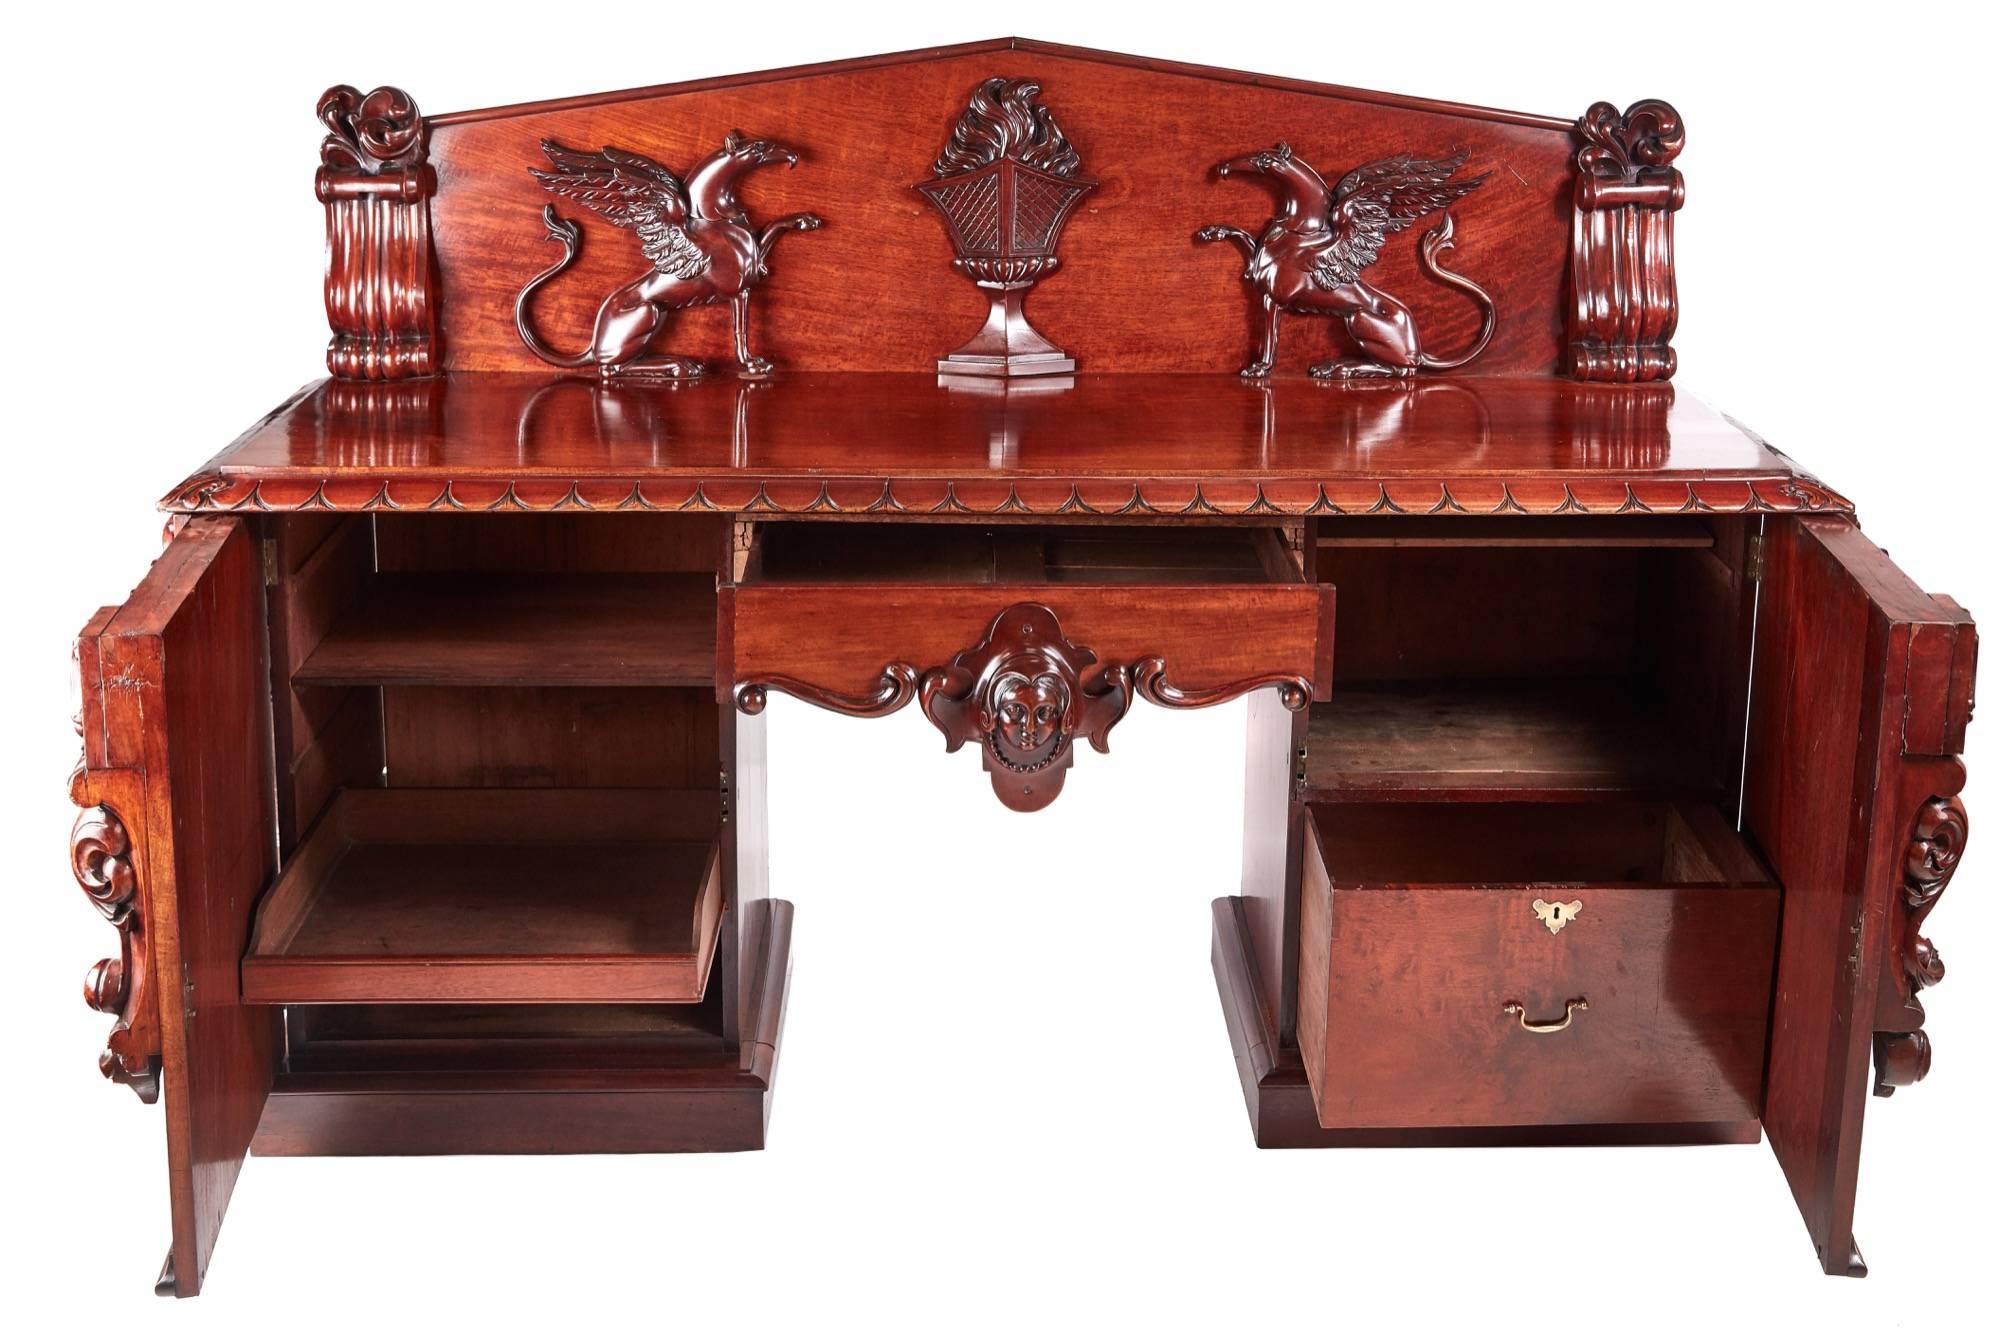 Outstanding quality William IV carved mahogany sideboard, the back faced with pair of high-relief carved griffons flanking a central flaming urn, the base having outstanding quality mahogany top with a lovely carved edge, one drawer to the centre